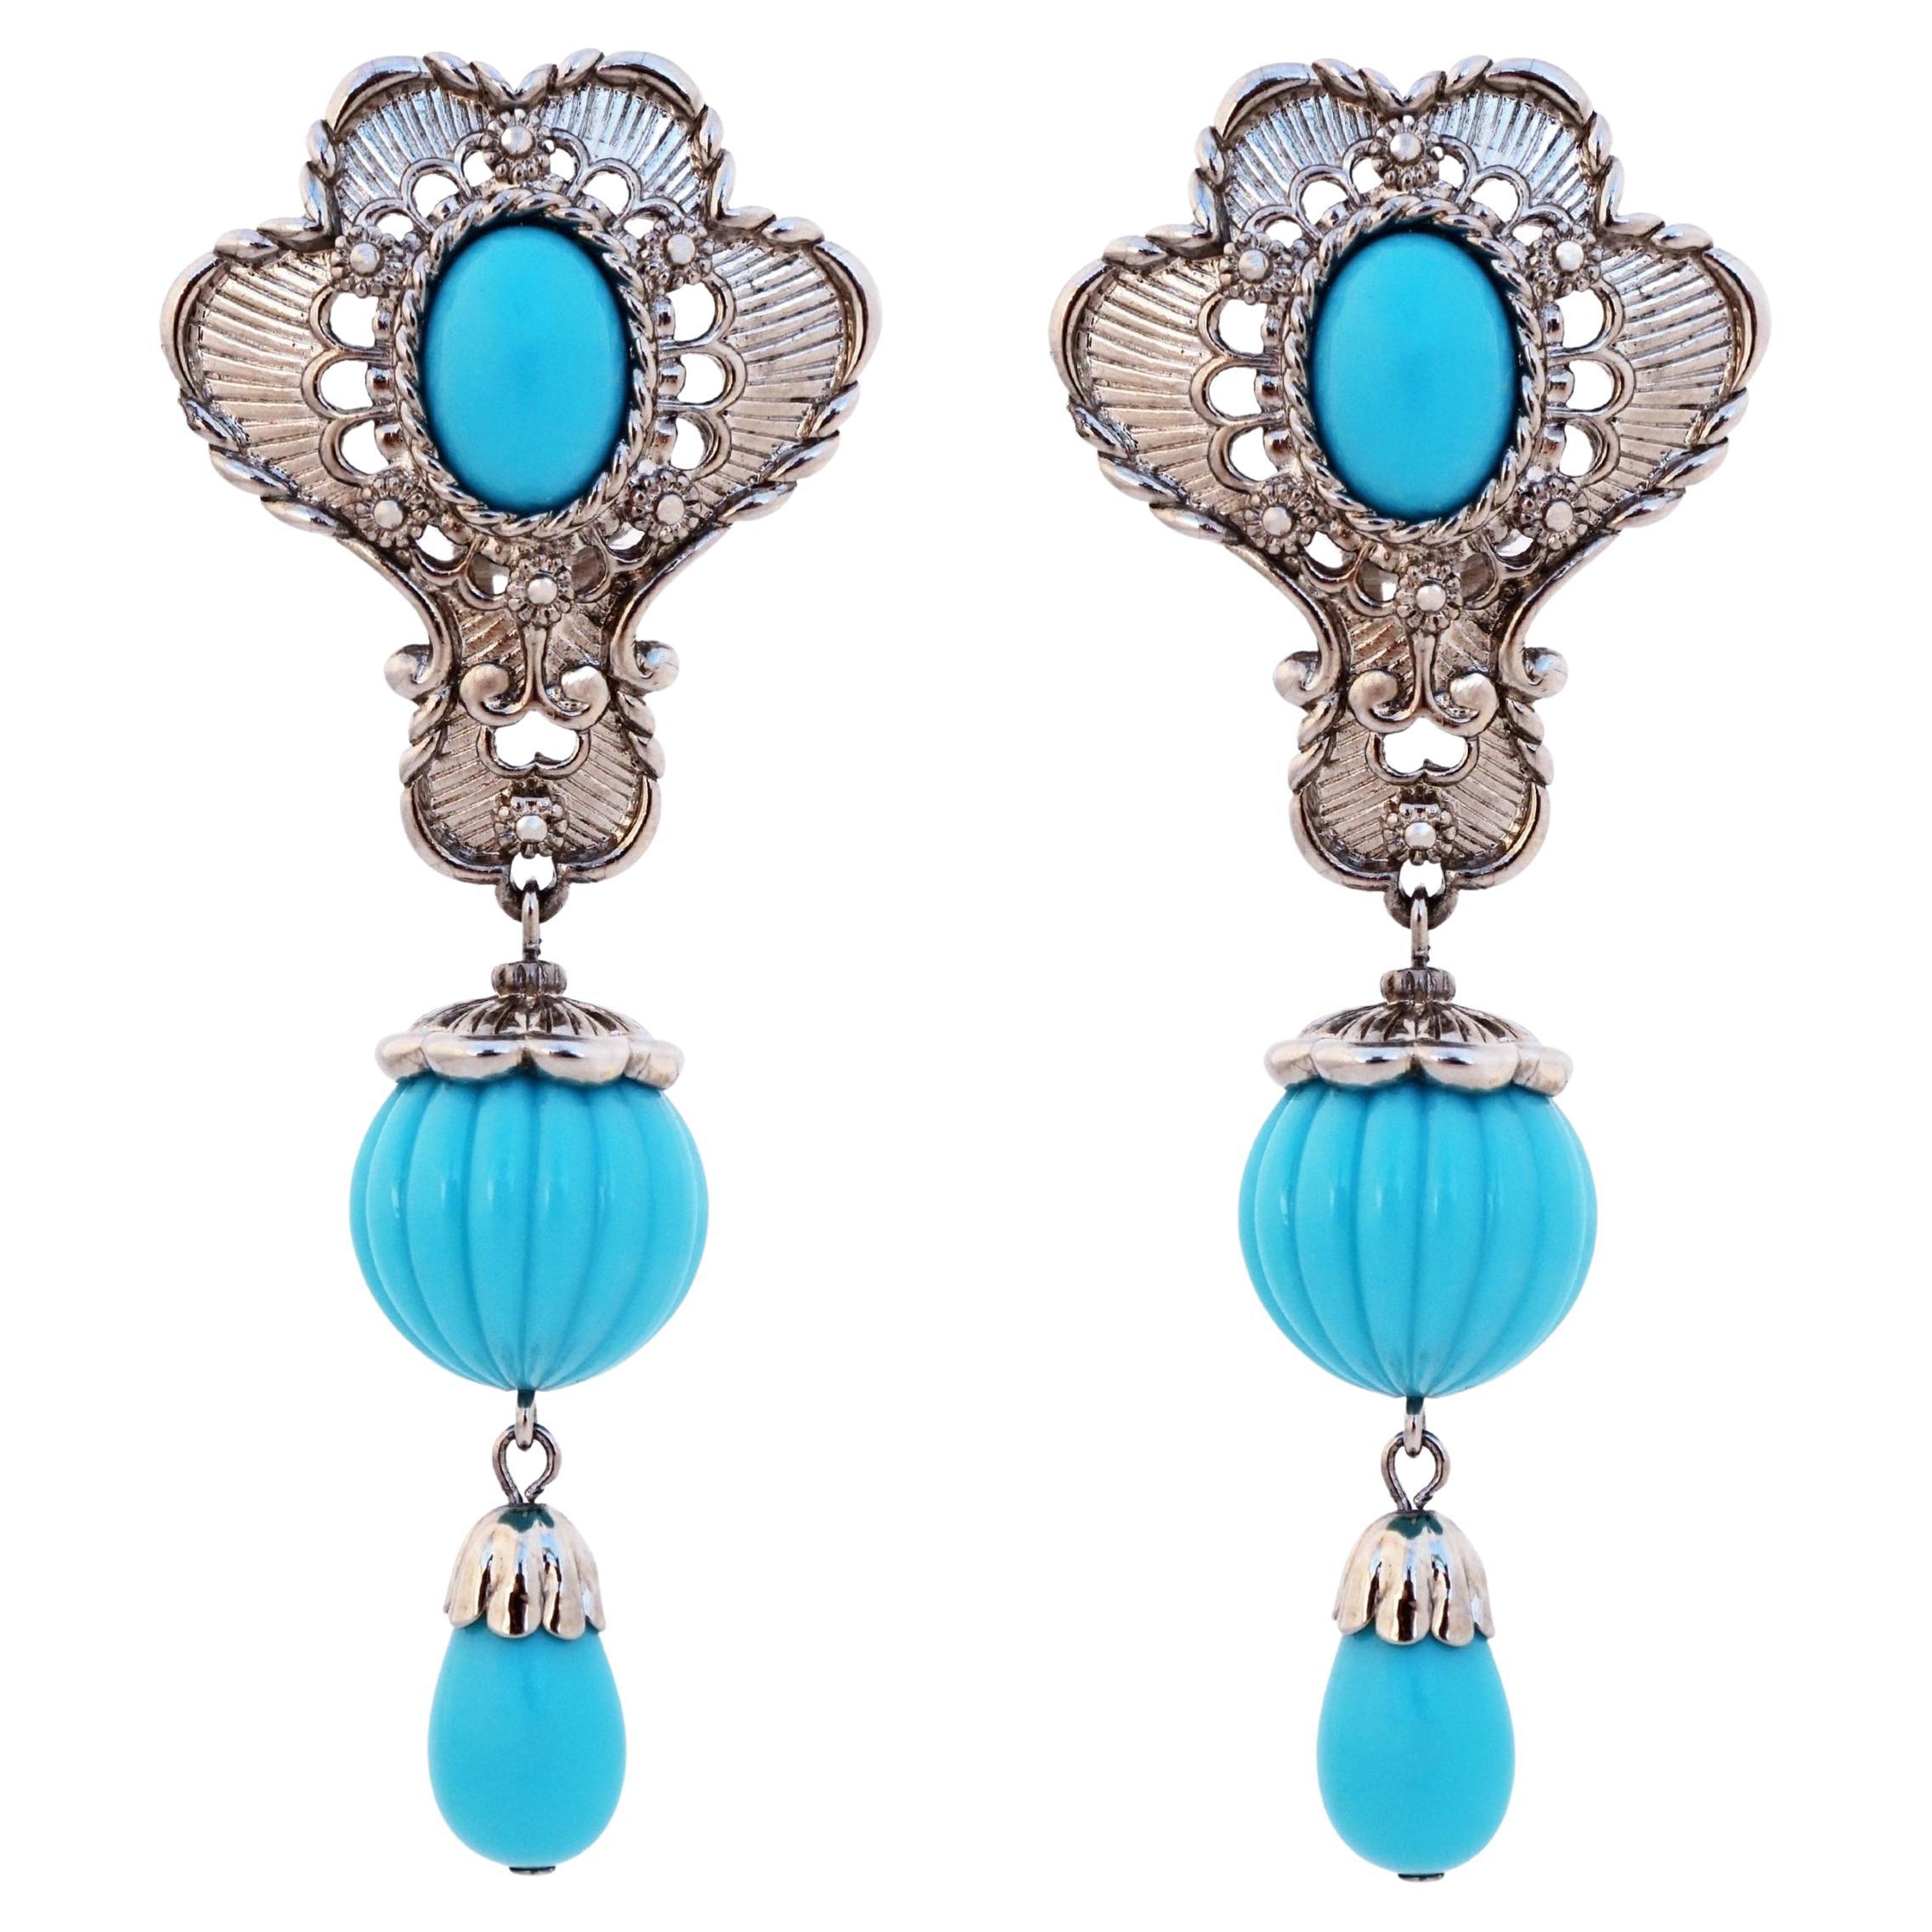 Ornate Silver Drop Earrings With Faux Turquoise By Jose & Maria Barrera, 1980s For Sale